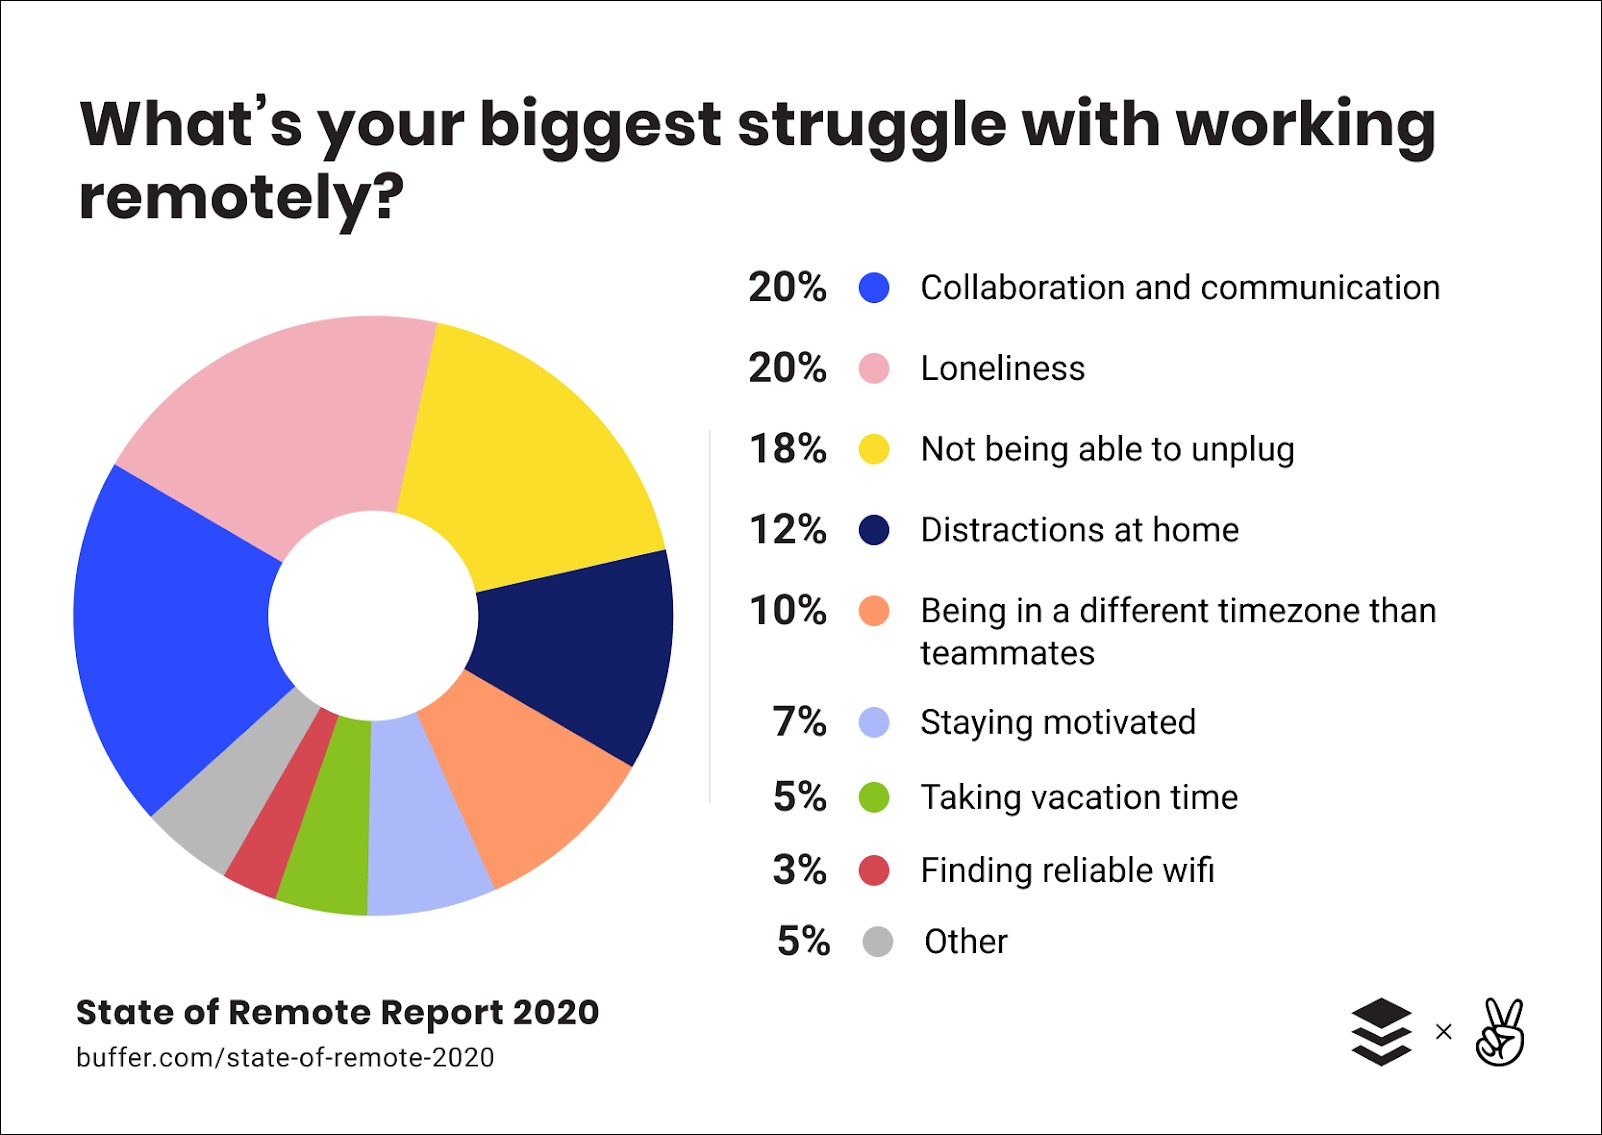 Top 5 Collaboration Tools for Remote Content Teams